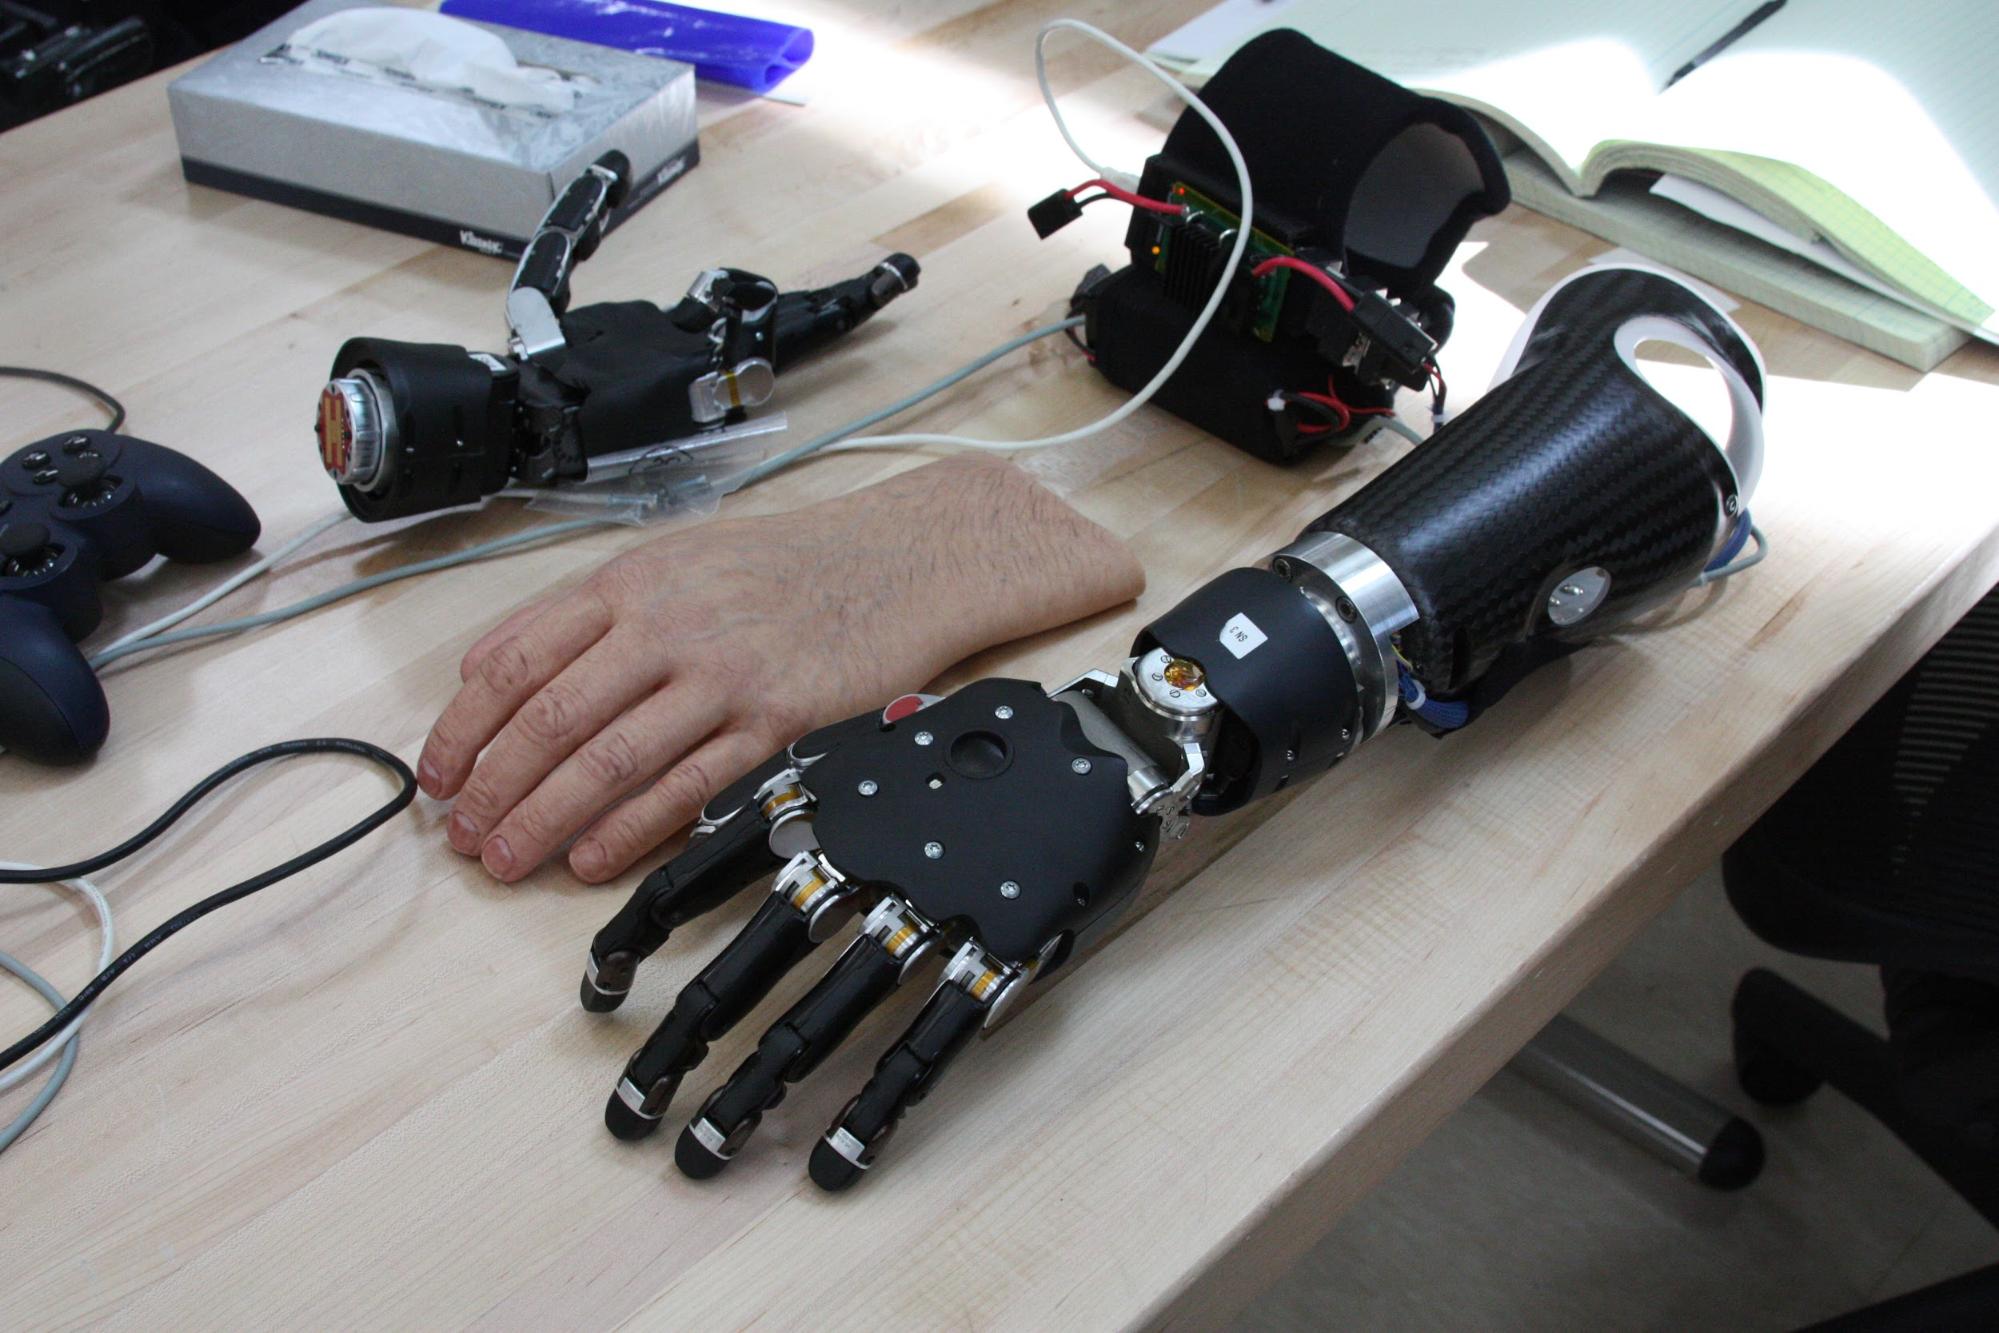 The Modular Prosthetic Limb was developed by the Johns Hopkins Applied Physics Laboratory Source